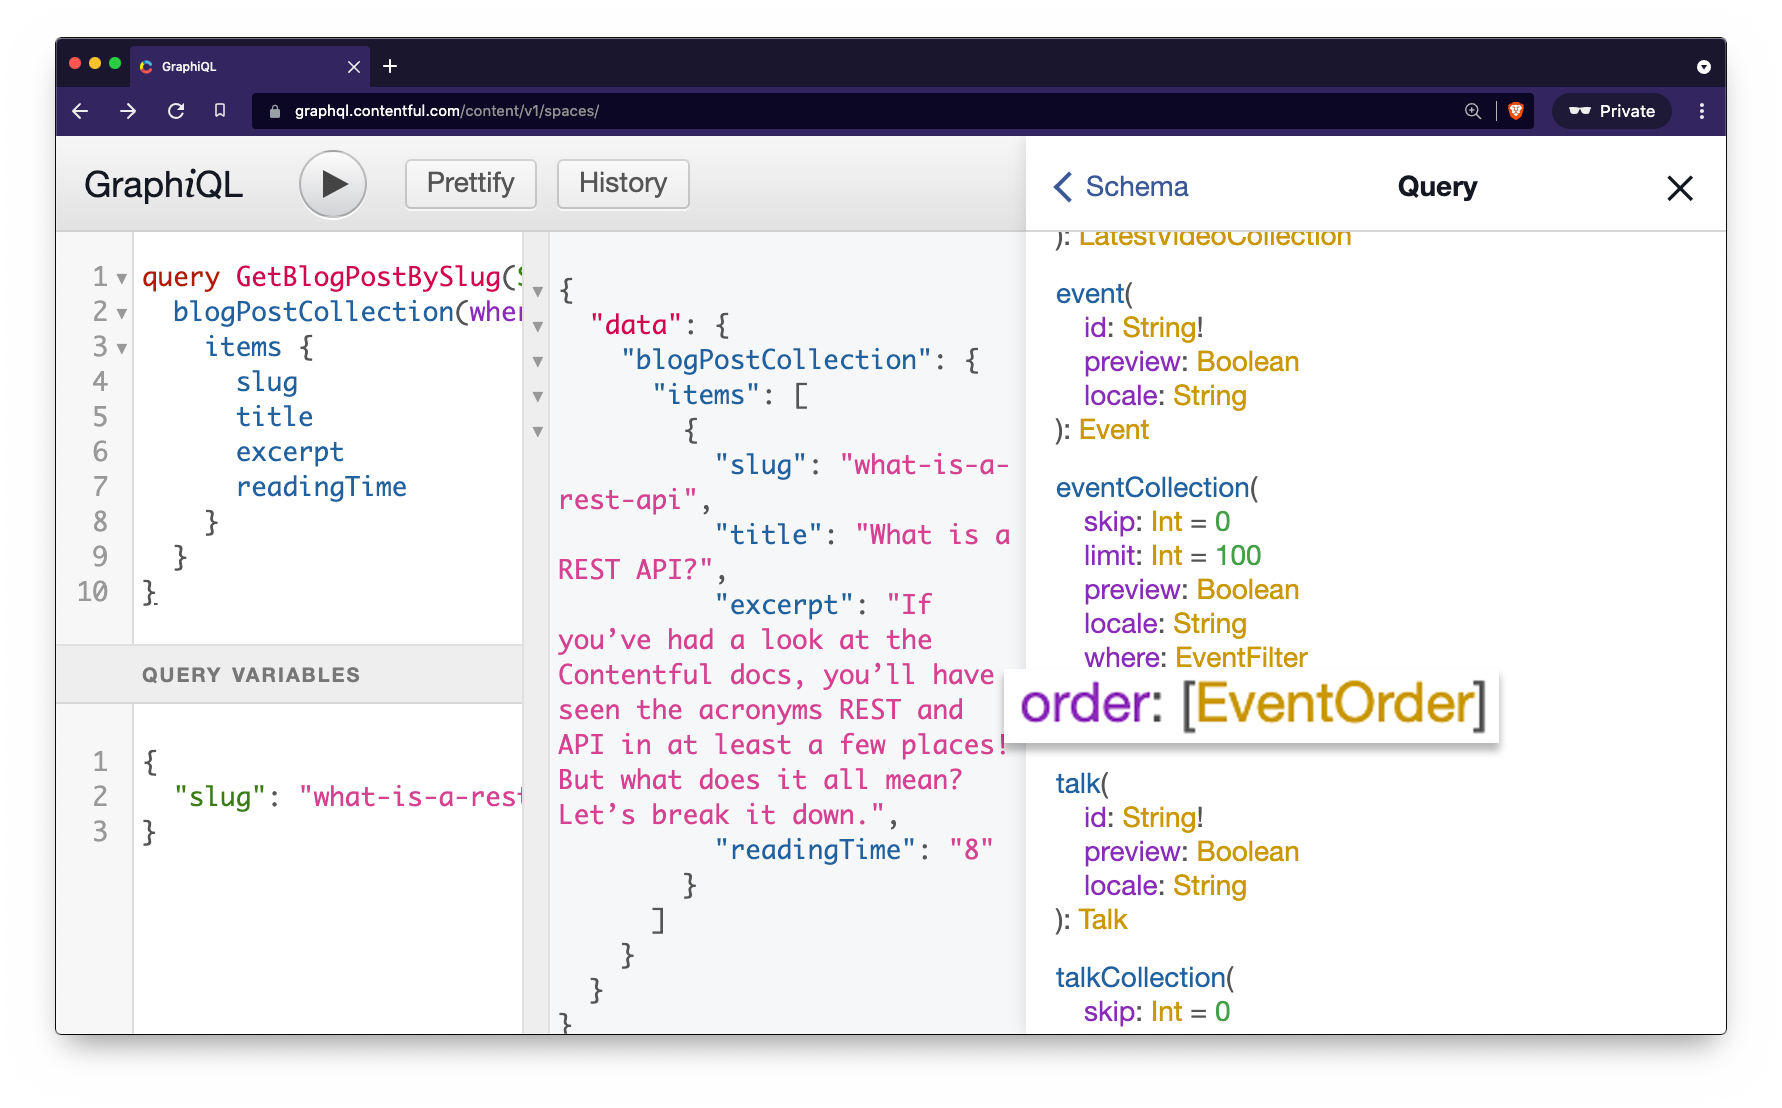 A screenshot of the GraphiQL explorer, showing the query tab open to inspect the scheme, with the type order: EventOrder highlighted.